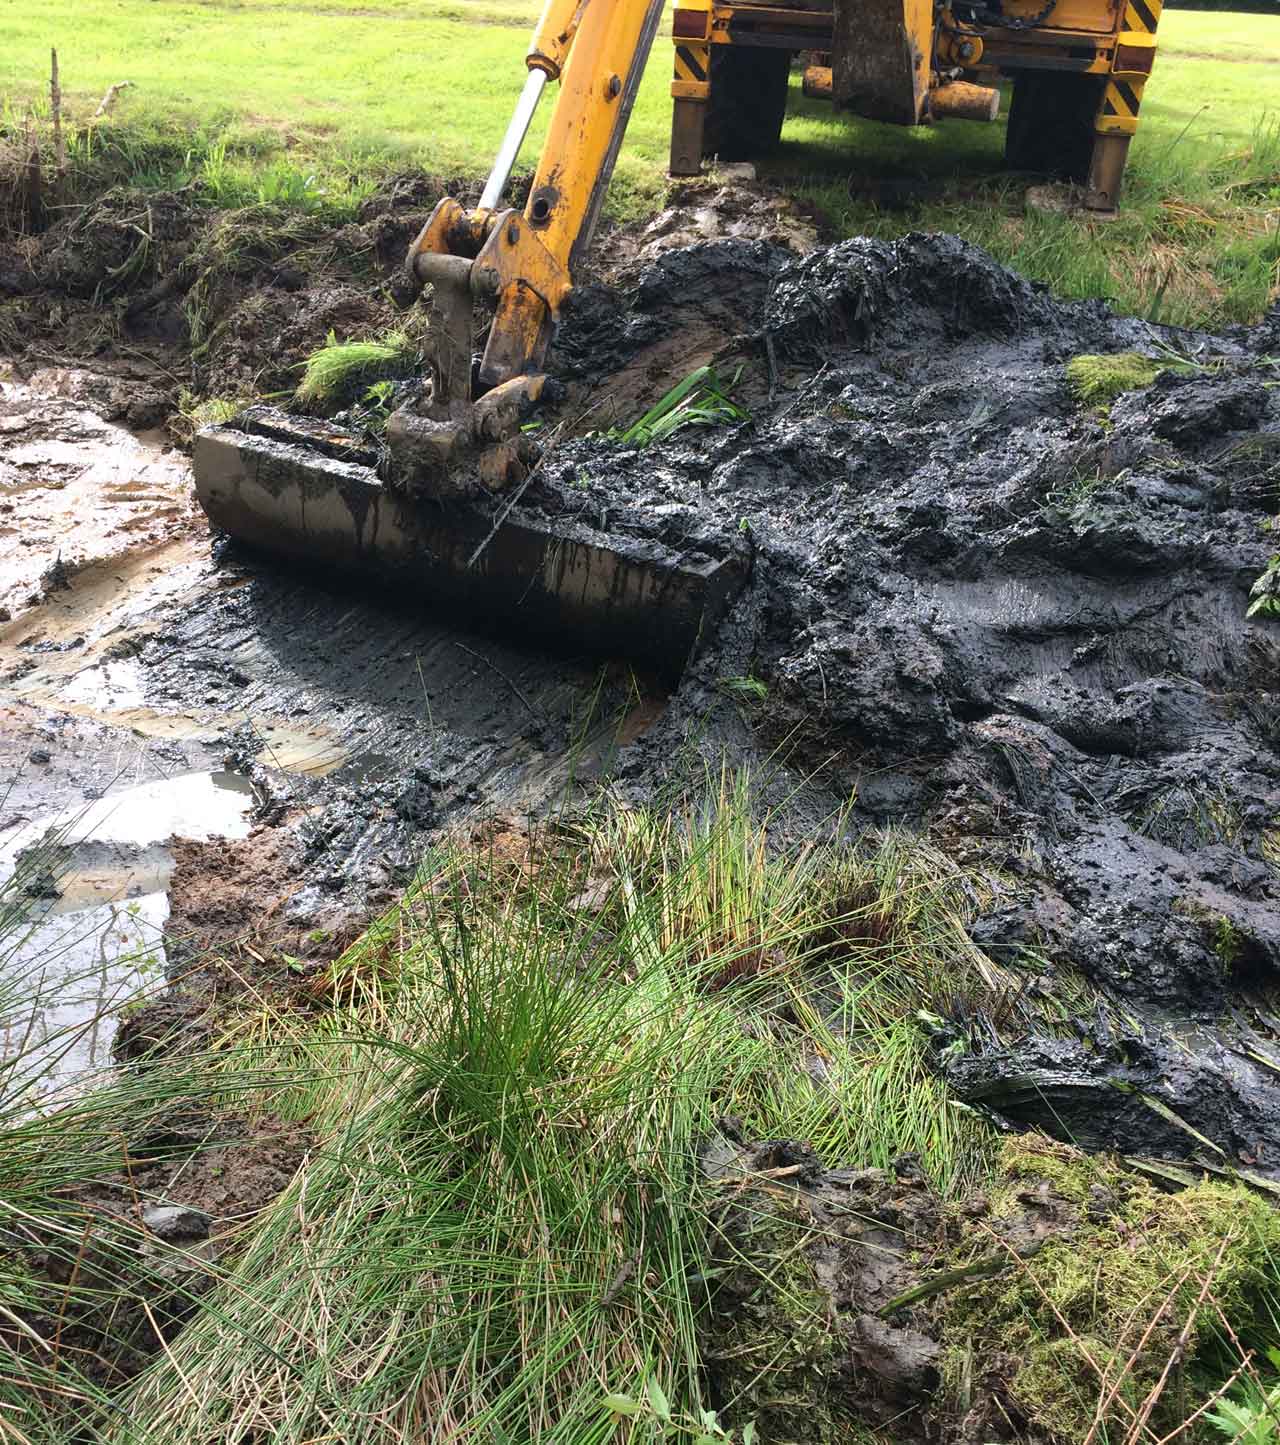 Image of a JCB cleaning the edge of a lake at Barkham in Berkshire - Lake dredging, lake cleaning and traditional clay lake lining at Barkham Manor in Berkshire - Let the digger do it!